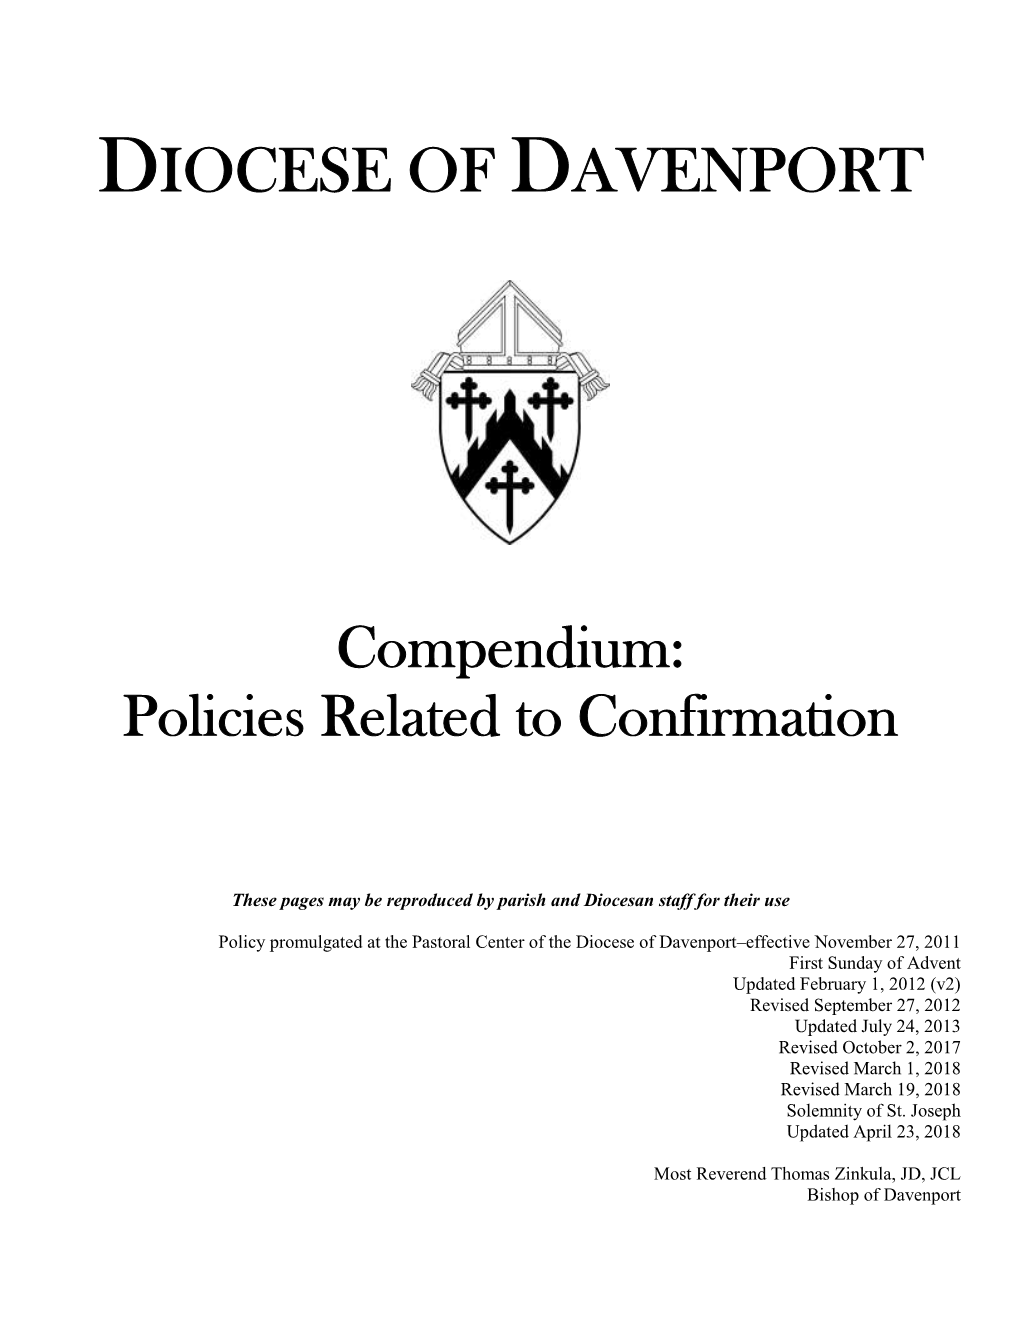 Policies Related to Confirmation